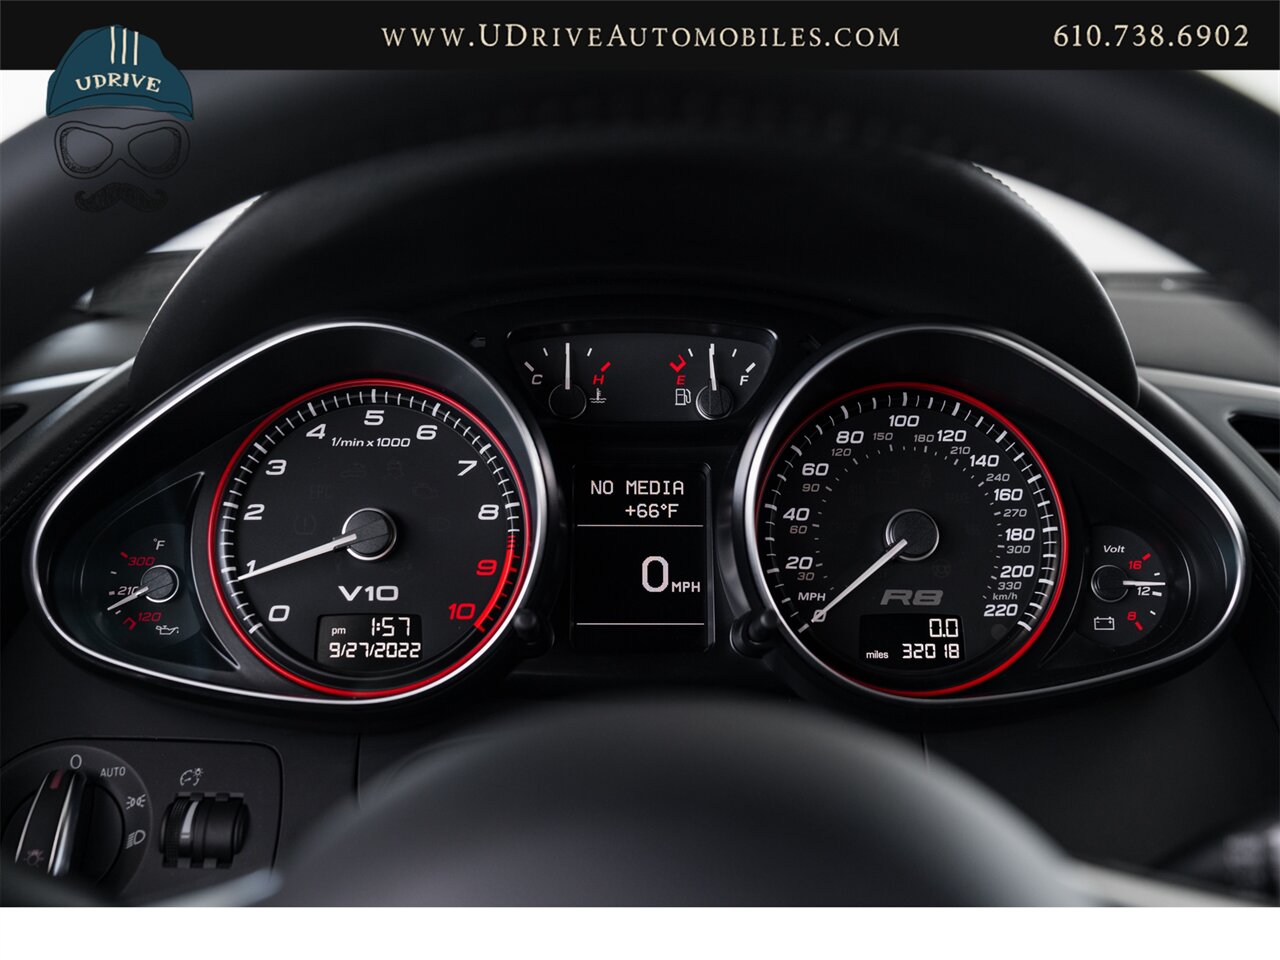 2011 Audi R8 5.2 Quattro  V10 6 Speed Manual - Photo 33 - West Chester, PA 19382